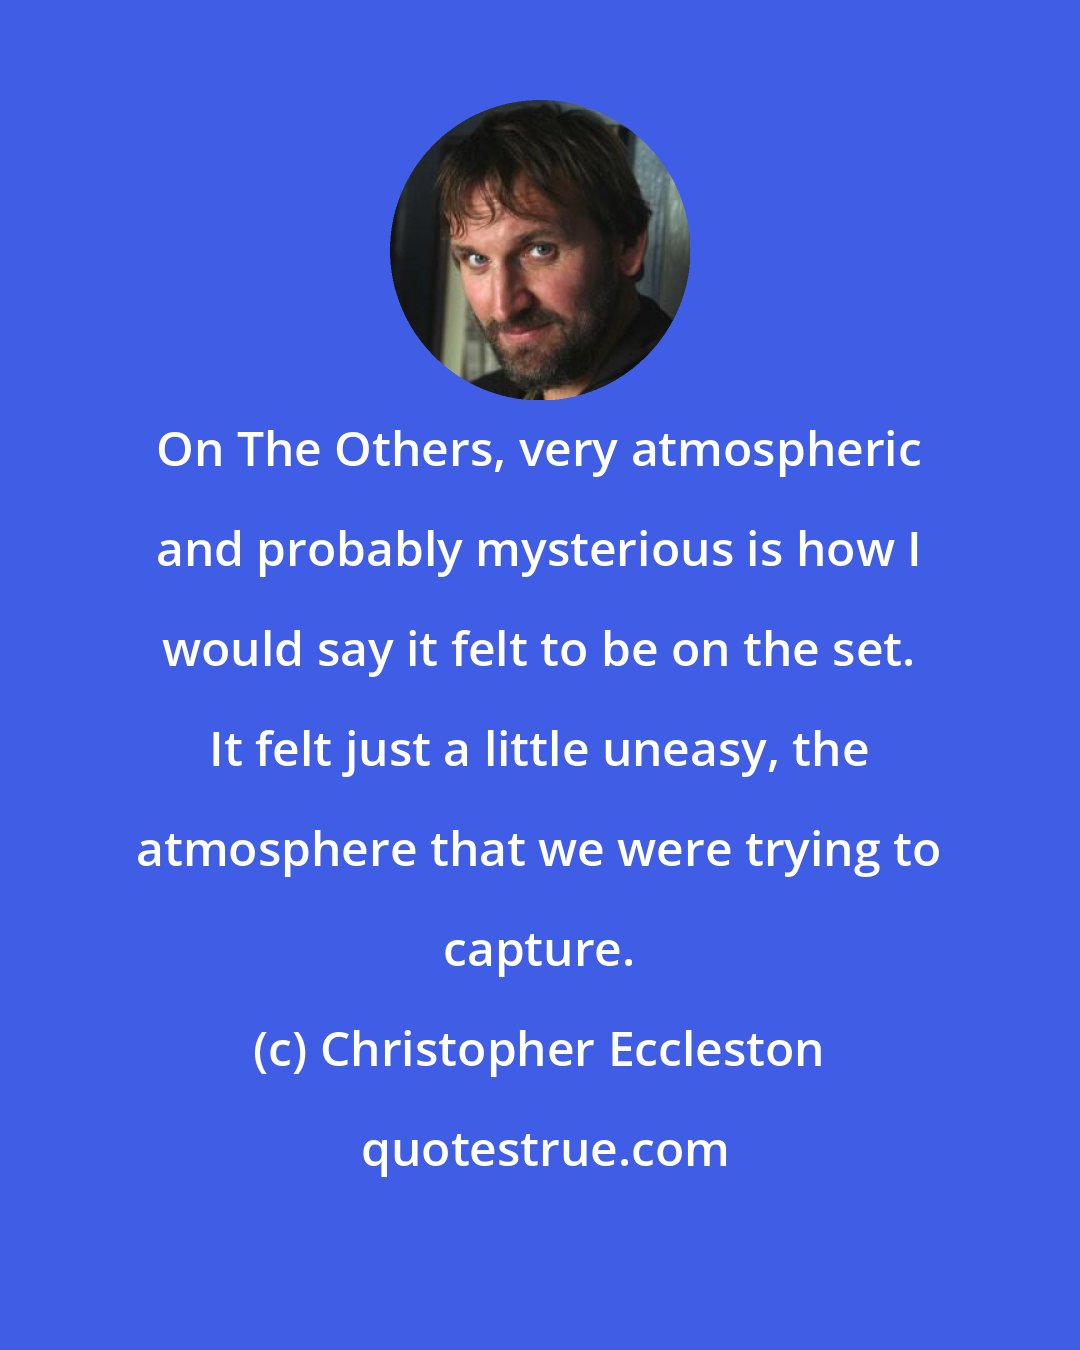 Christopher Eccleston: On The Others, very atmospheric and probably mysterious is how I would say it felt to be on the set. It felt just a little uneasy, the atmosphere that we were trying to capture.